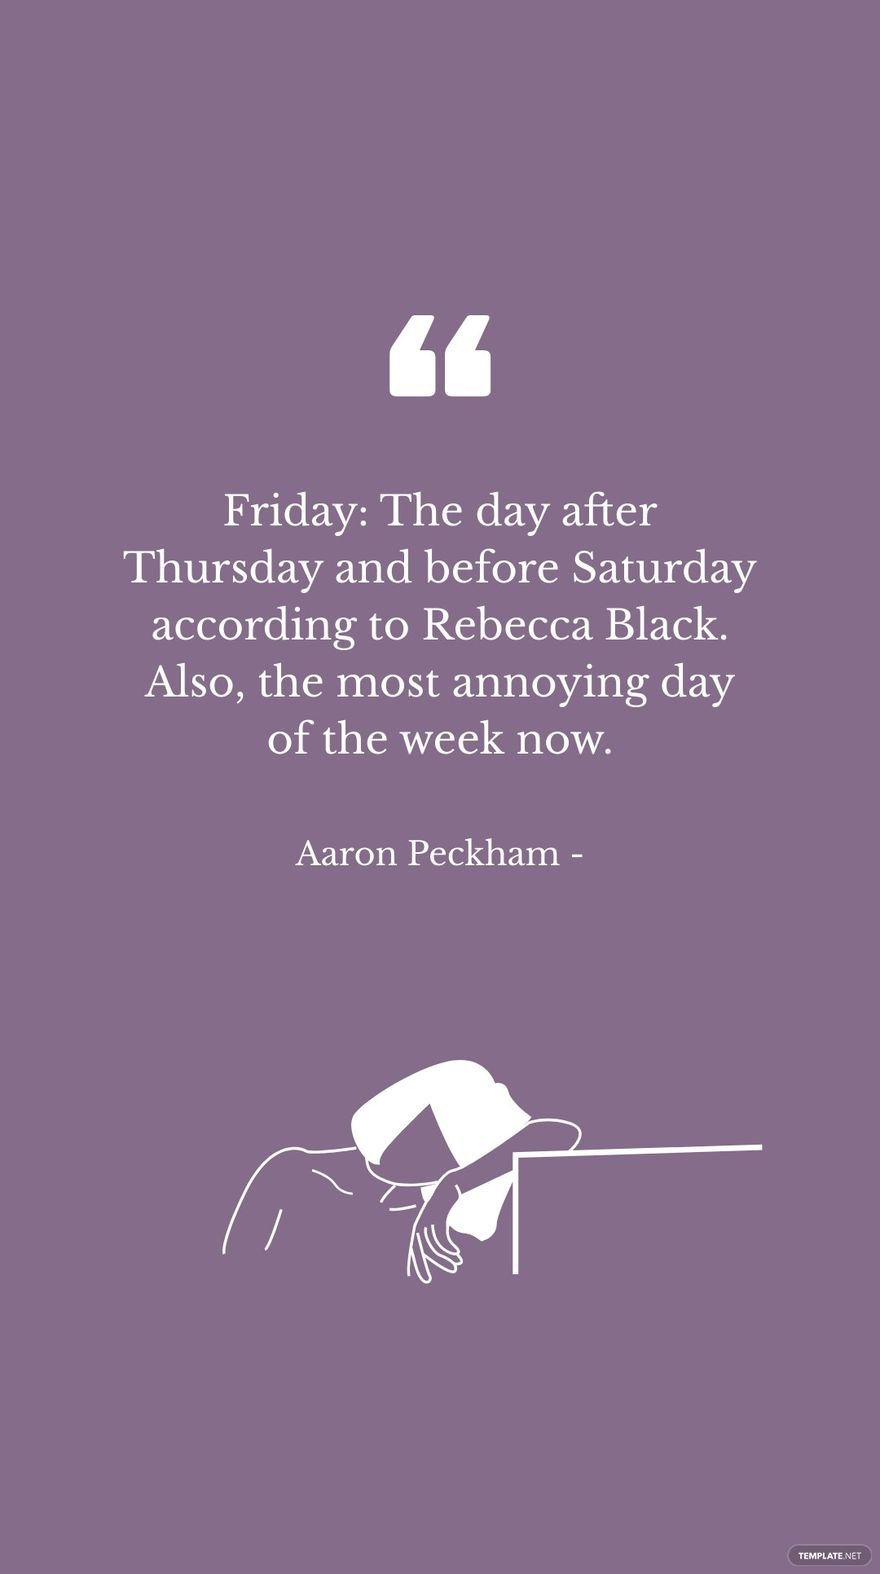 Aaron Peckham - Friday: The day after Thursday and before Saturday according to Rebecca Black. Also, the most annoying day of the week now.